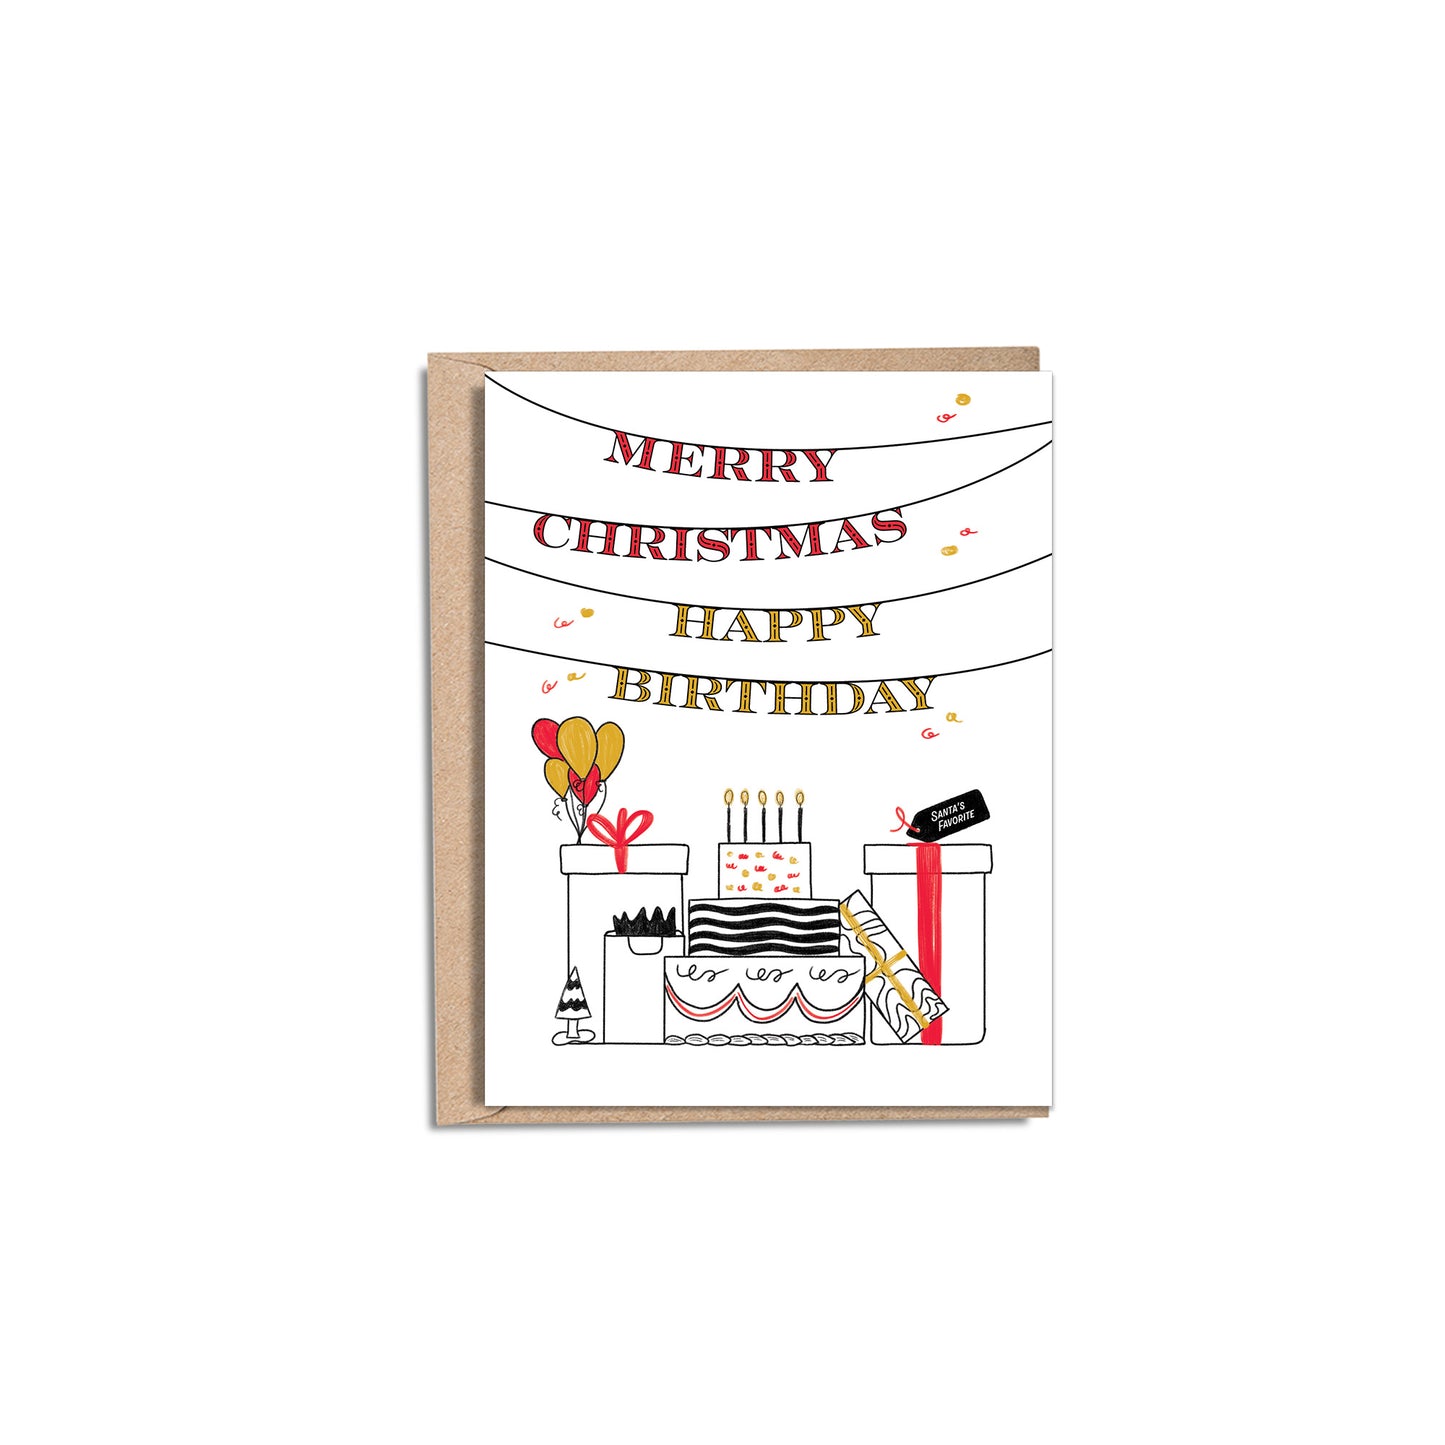 A simple illustration of a banner, cake, balloons, a mini Christmas tree, red and yellow confetti, and gift boxes celebrating Christmas and a birthday. At the top are Merry Christmas in red  and Happy Birthday in yellow as a banner.